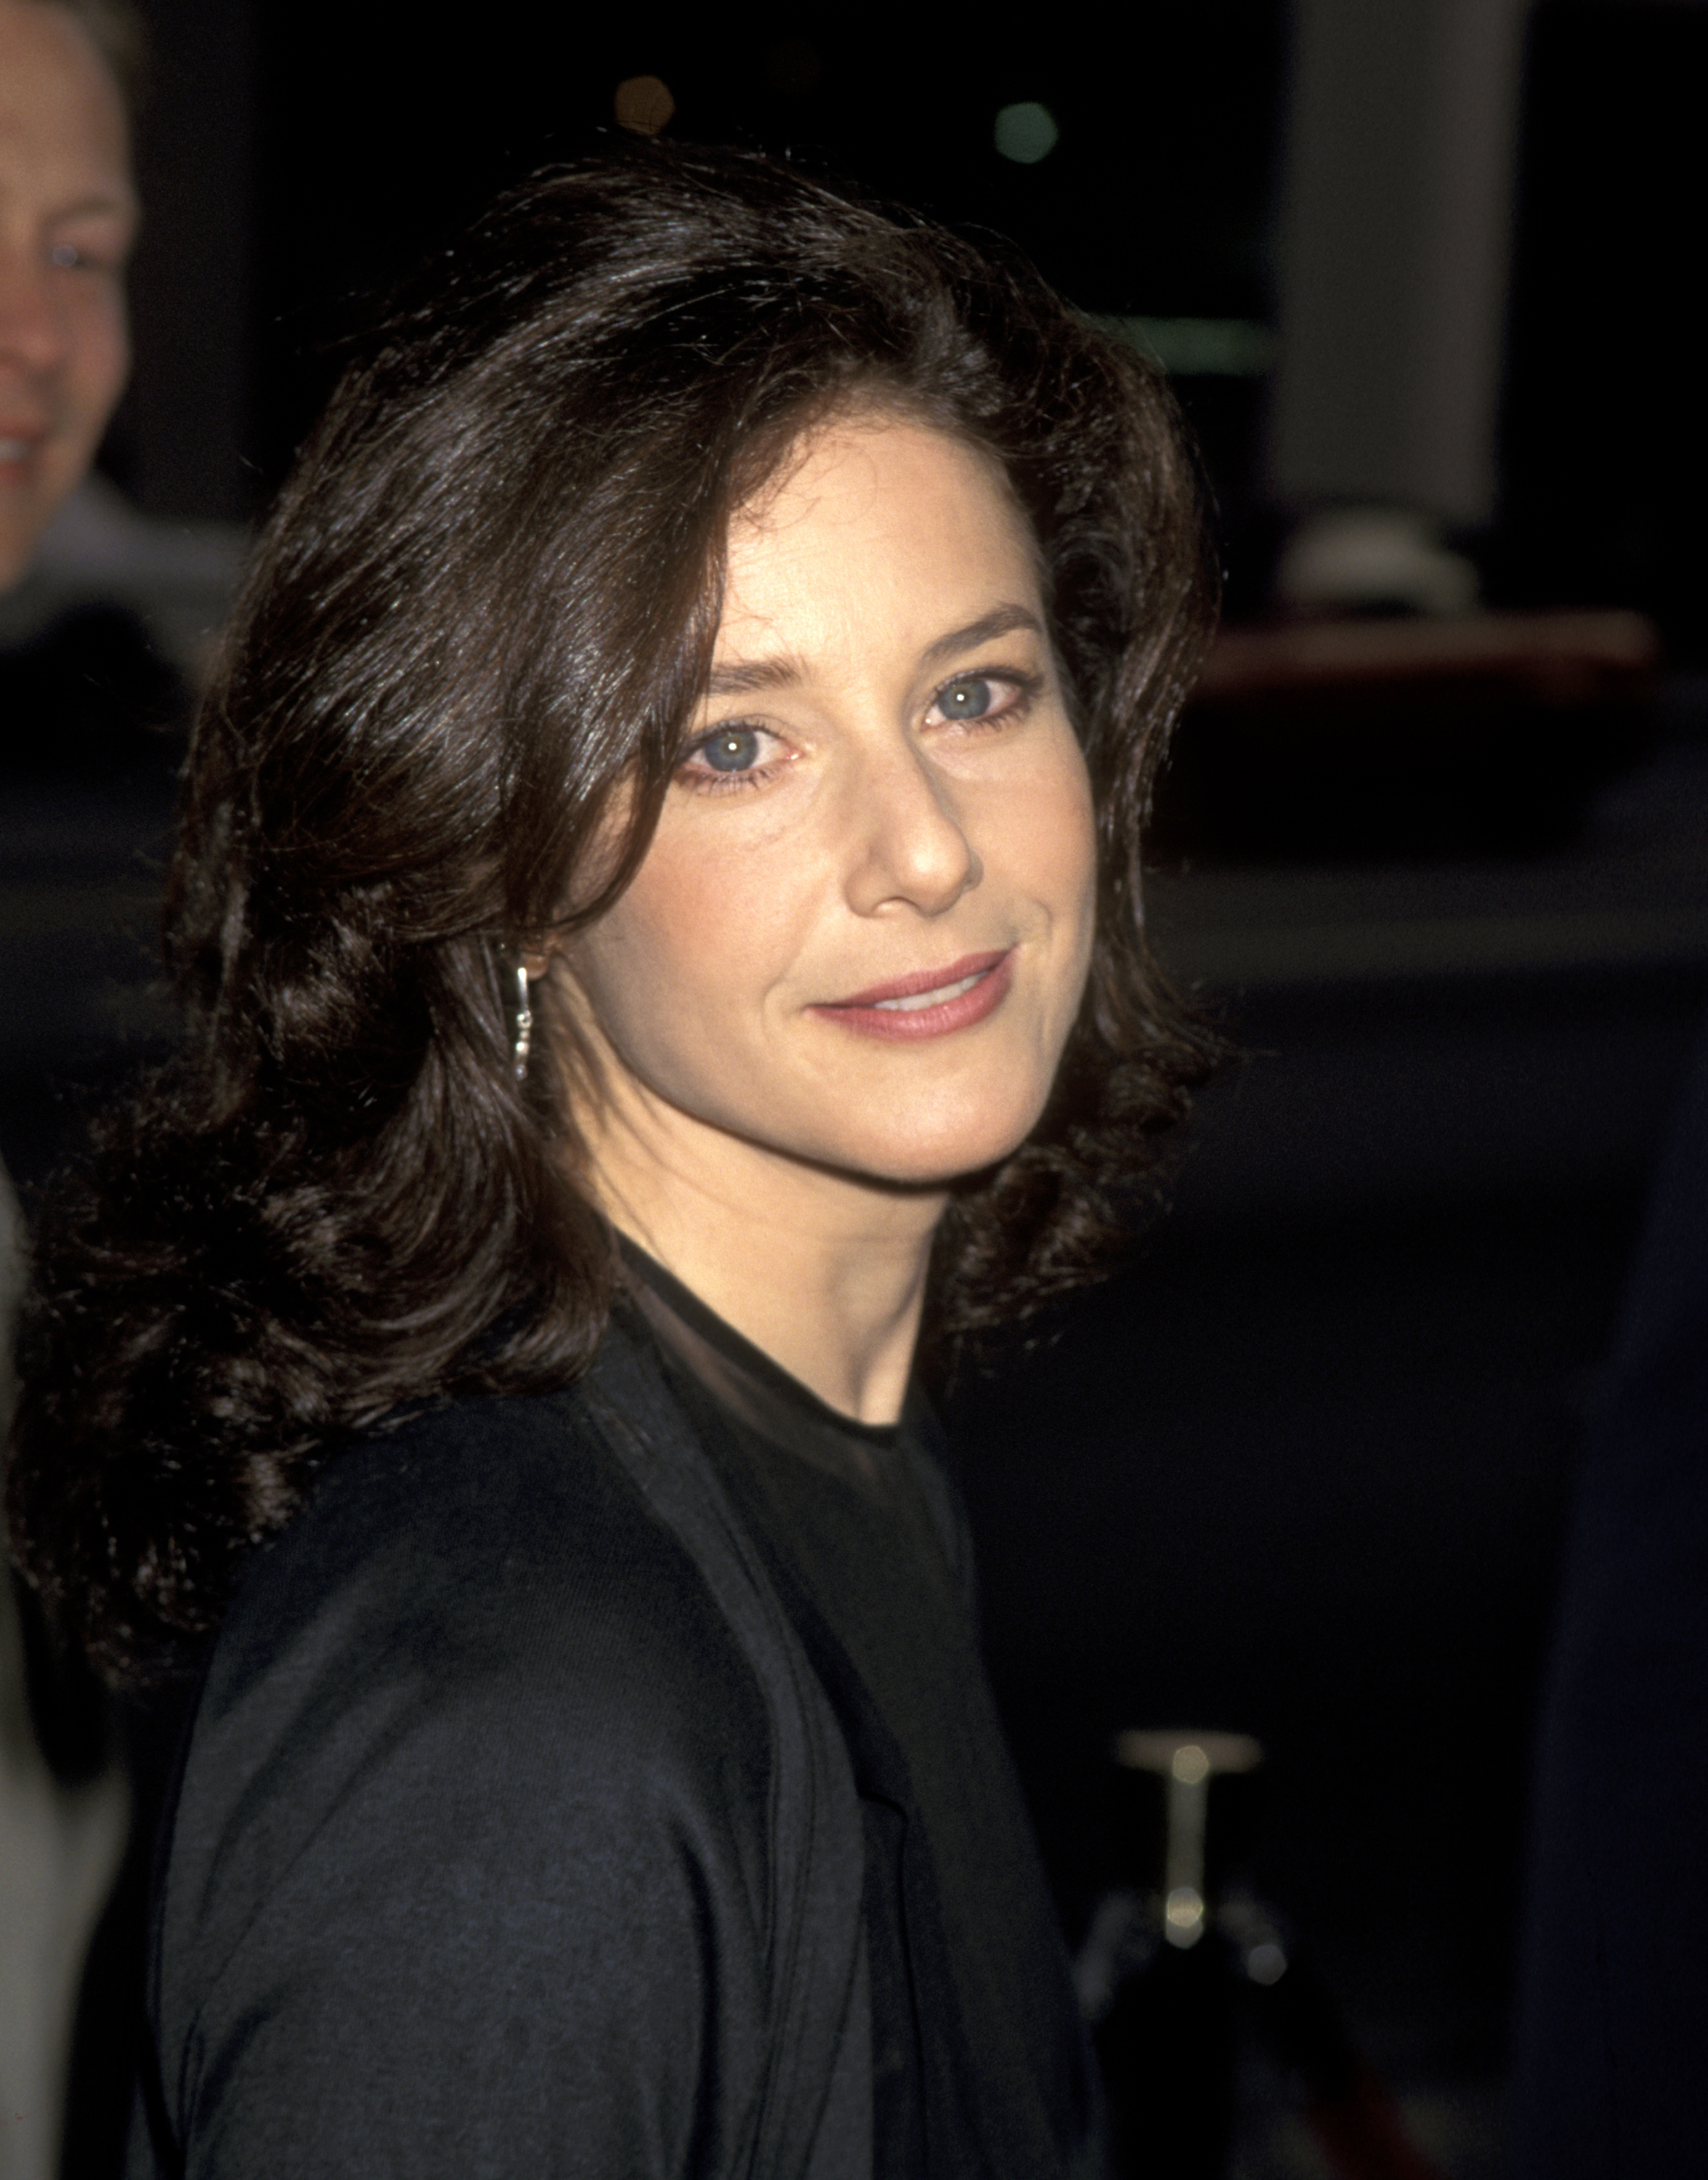 Debra Winger at the premiere of "Forget Paris," 1995 | Source: Getty Images